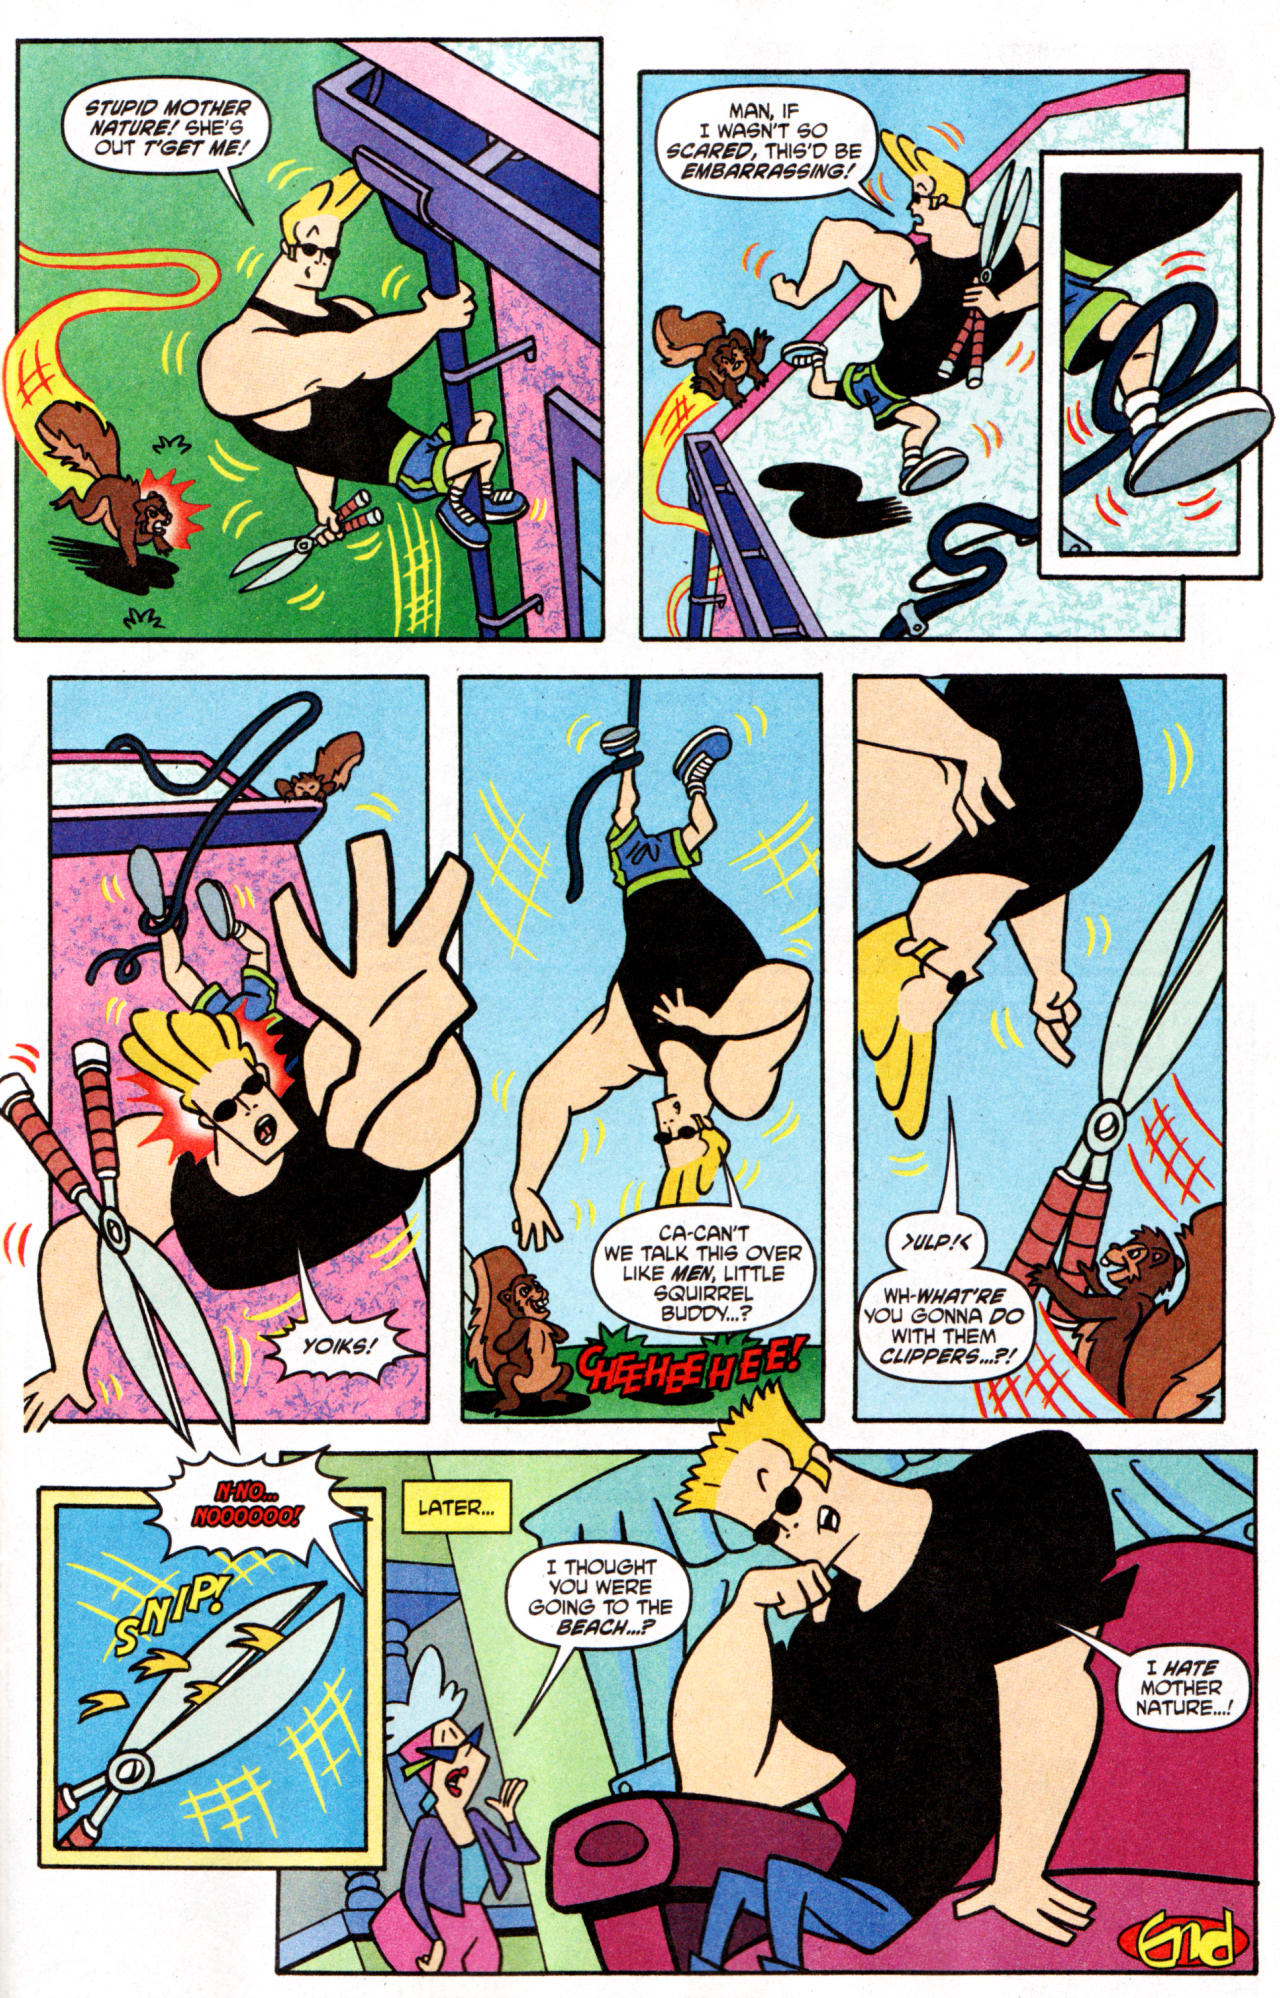 Read online Cartoon Network Block Party comic -  Issue #32 - 27